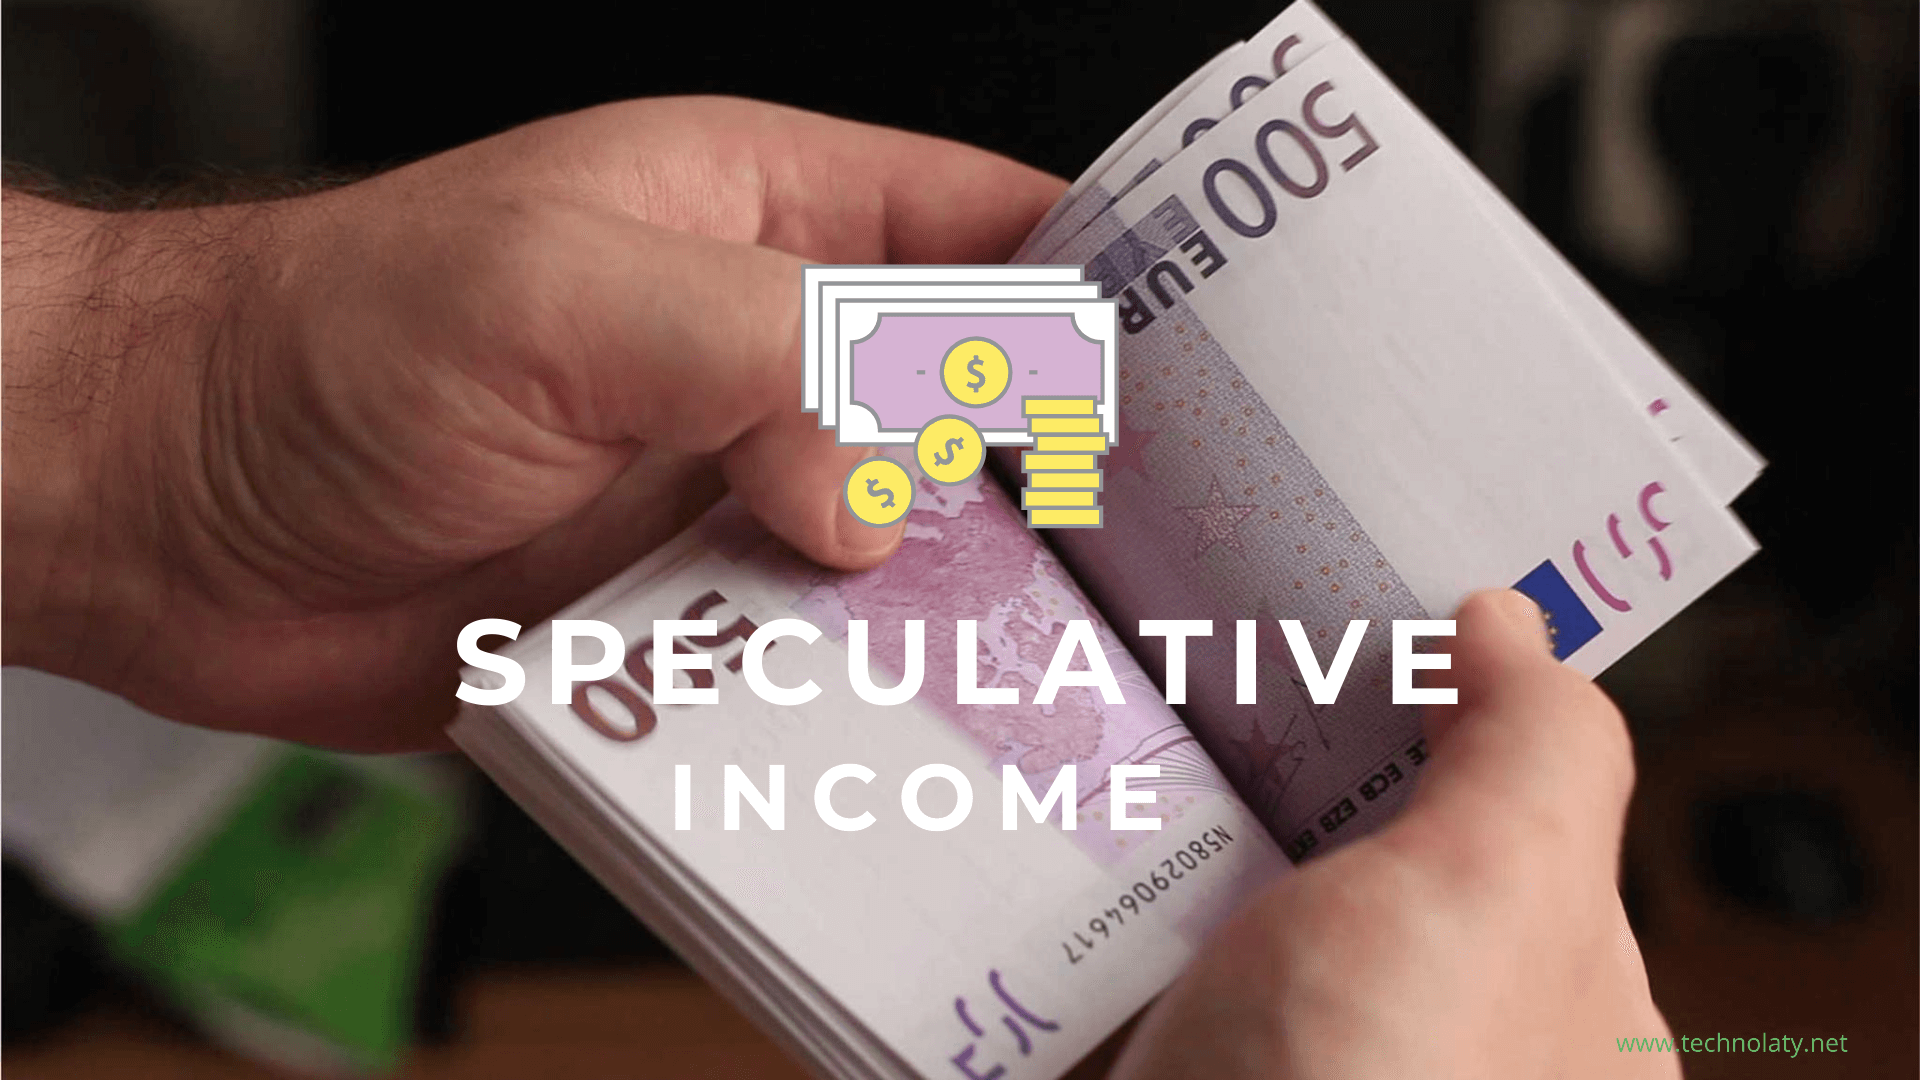 Everything About Speculative Income